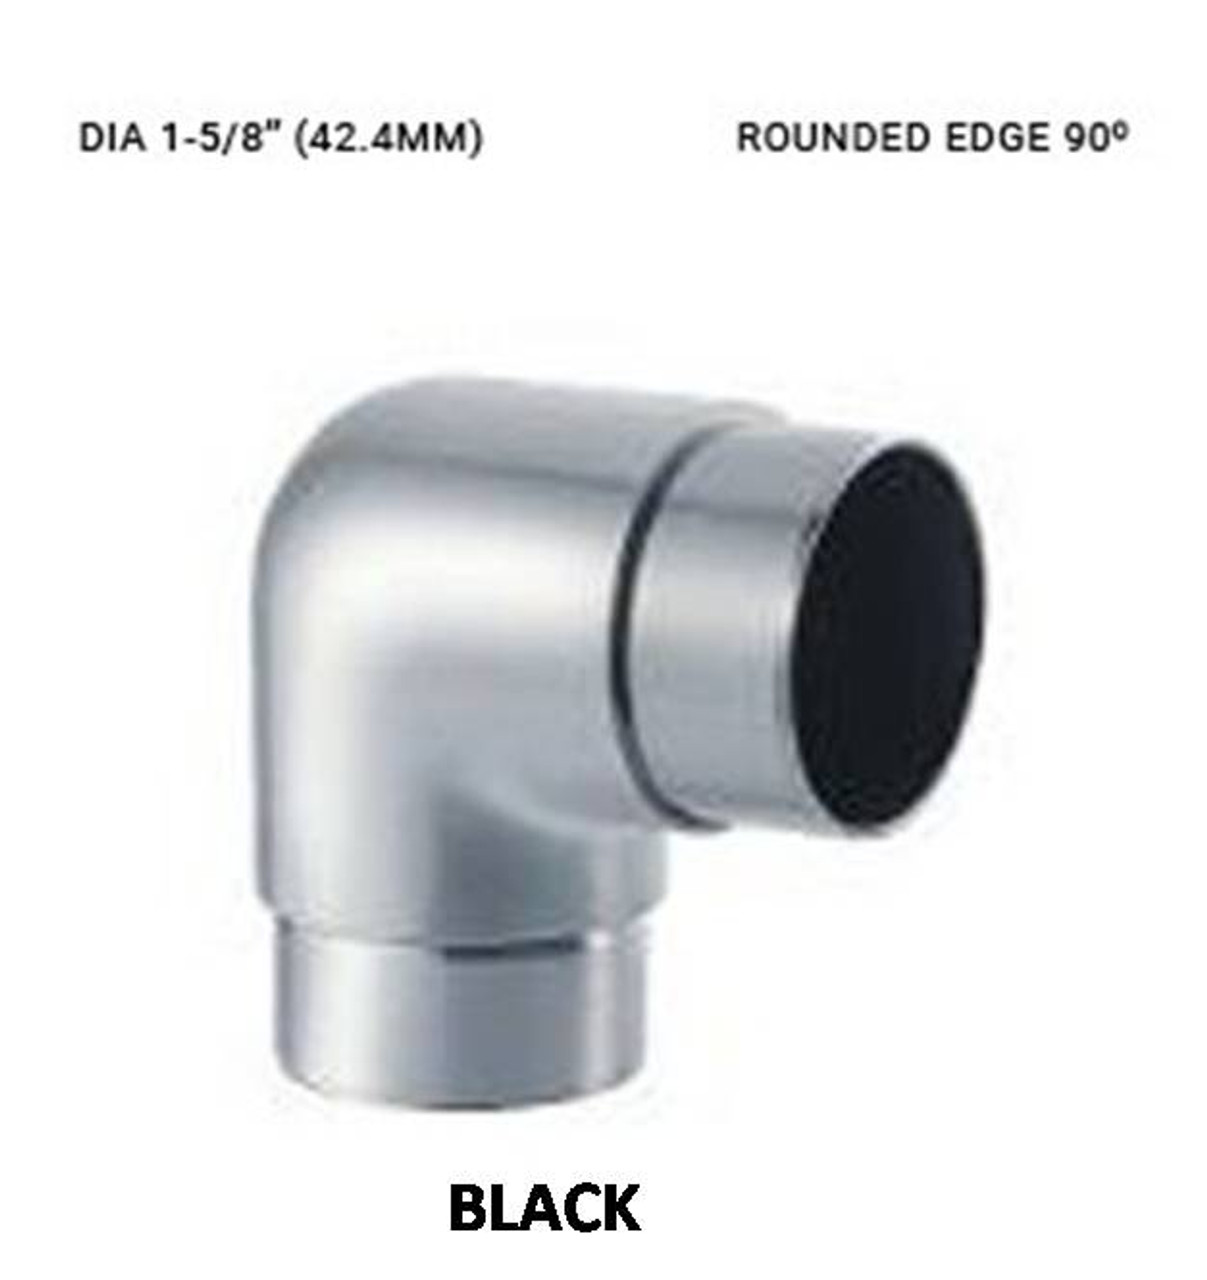 EB63064220RBS - BL ELBOW 90 DEGREE IN SS316 FOR 42.4 DIA PIPE WITH 2.0 MM